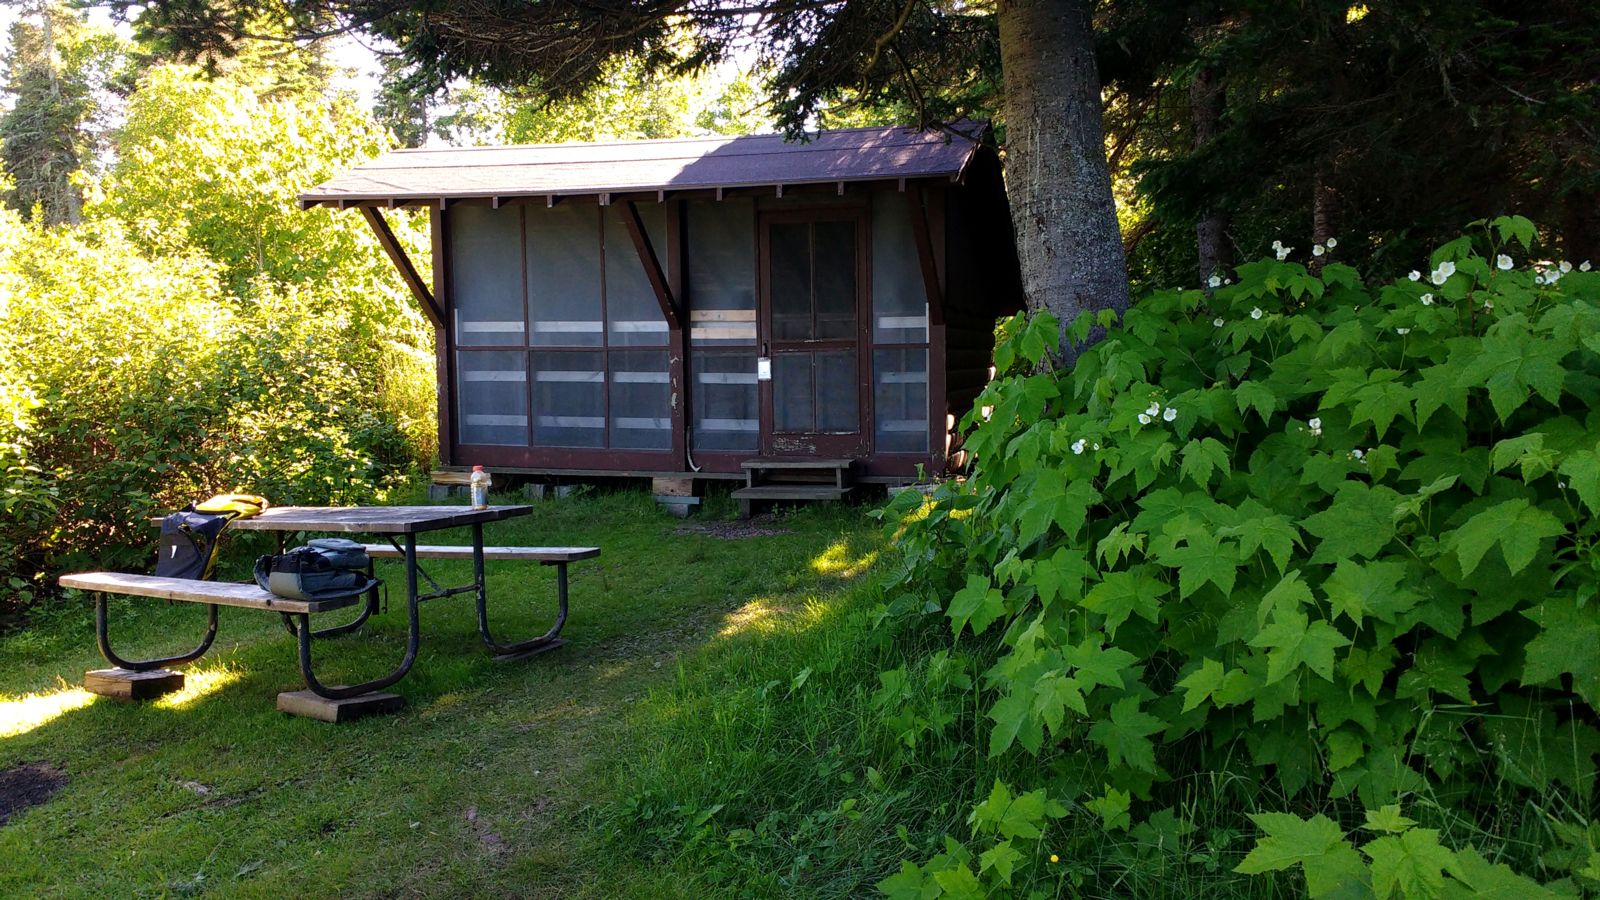 Grace Island Shelter, Isle Royale National Park - photo by Molly Cooper